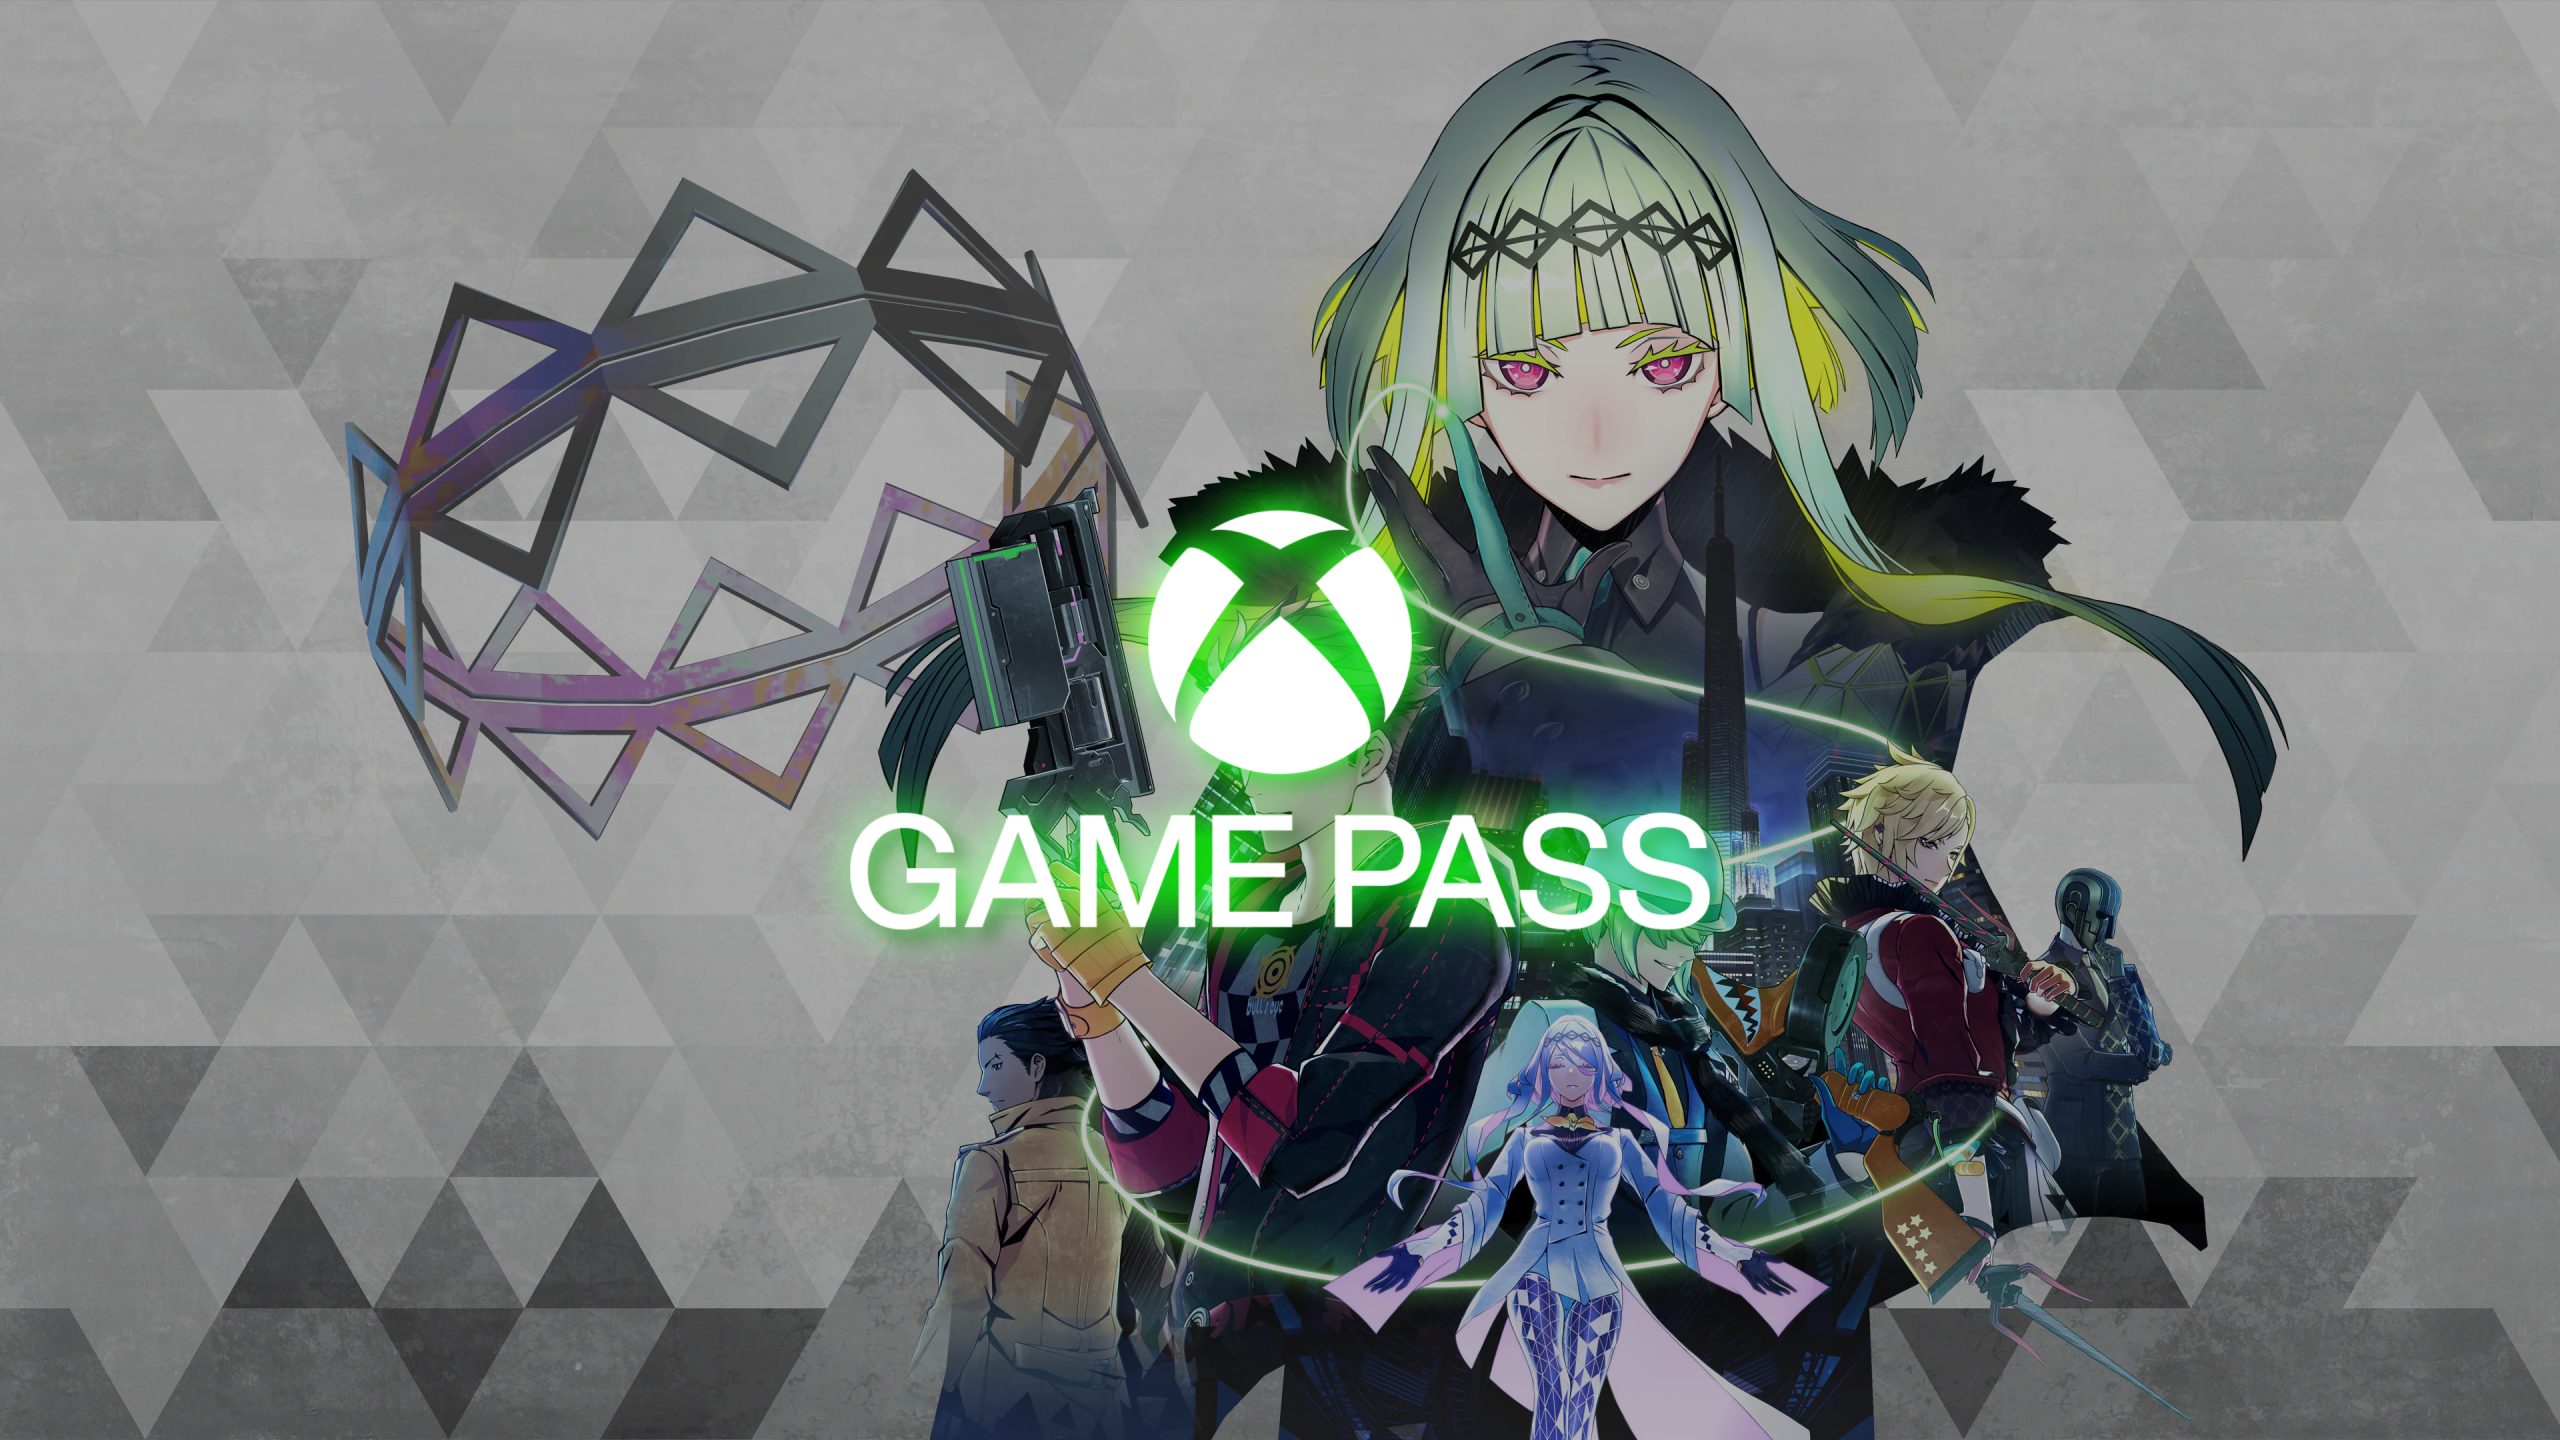 Souls Hackers 2 is Heading to Xbox Game Pass on February 28th - Fextralife